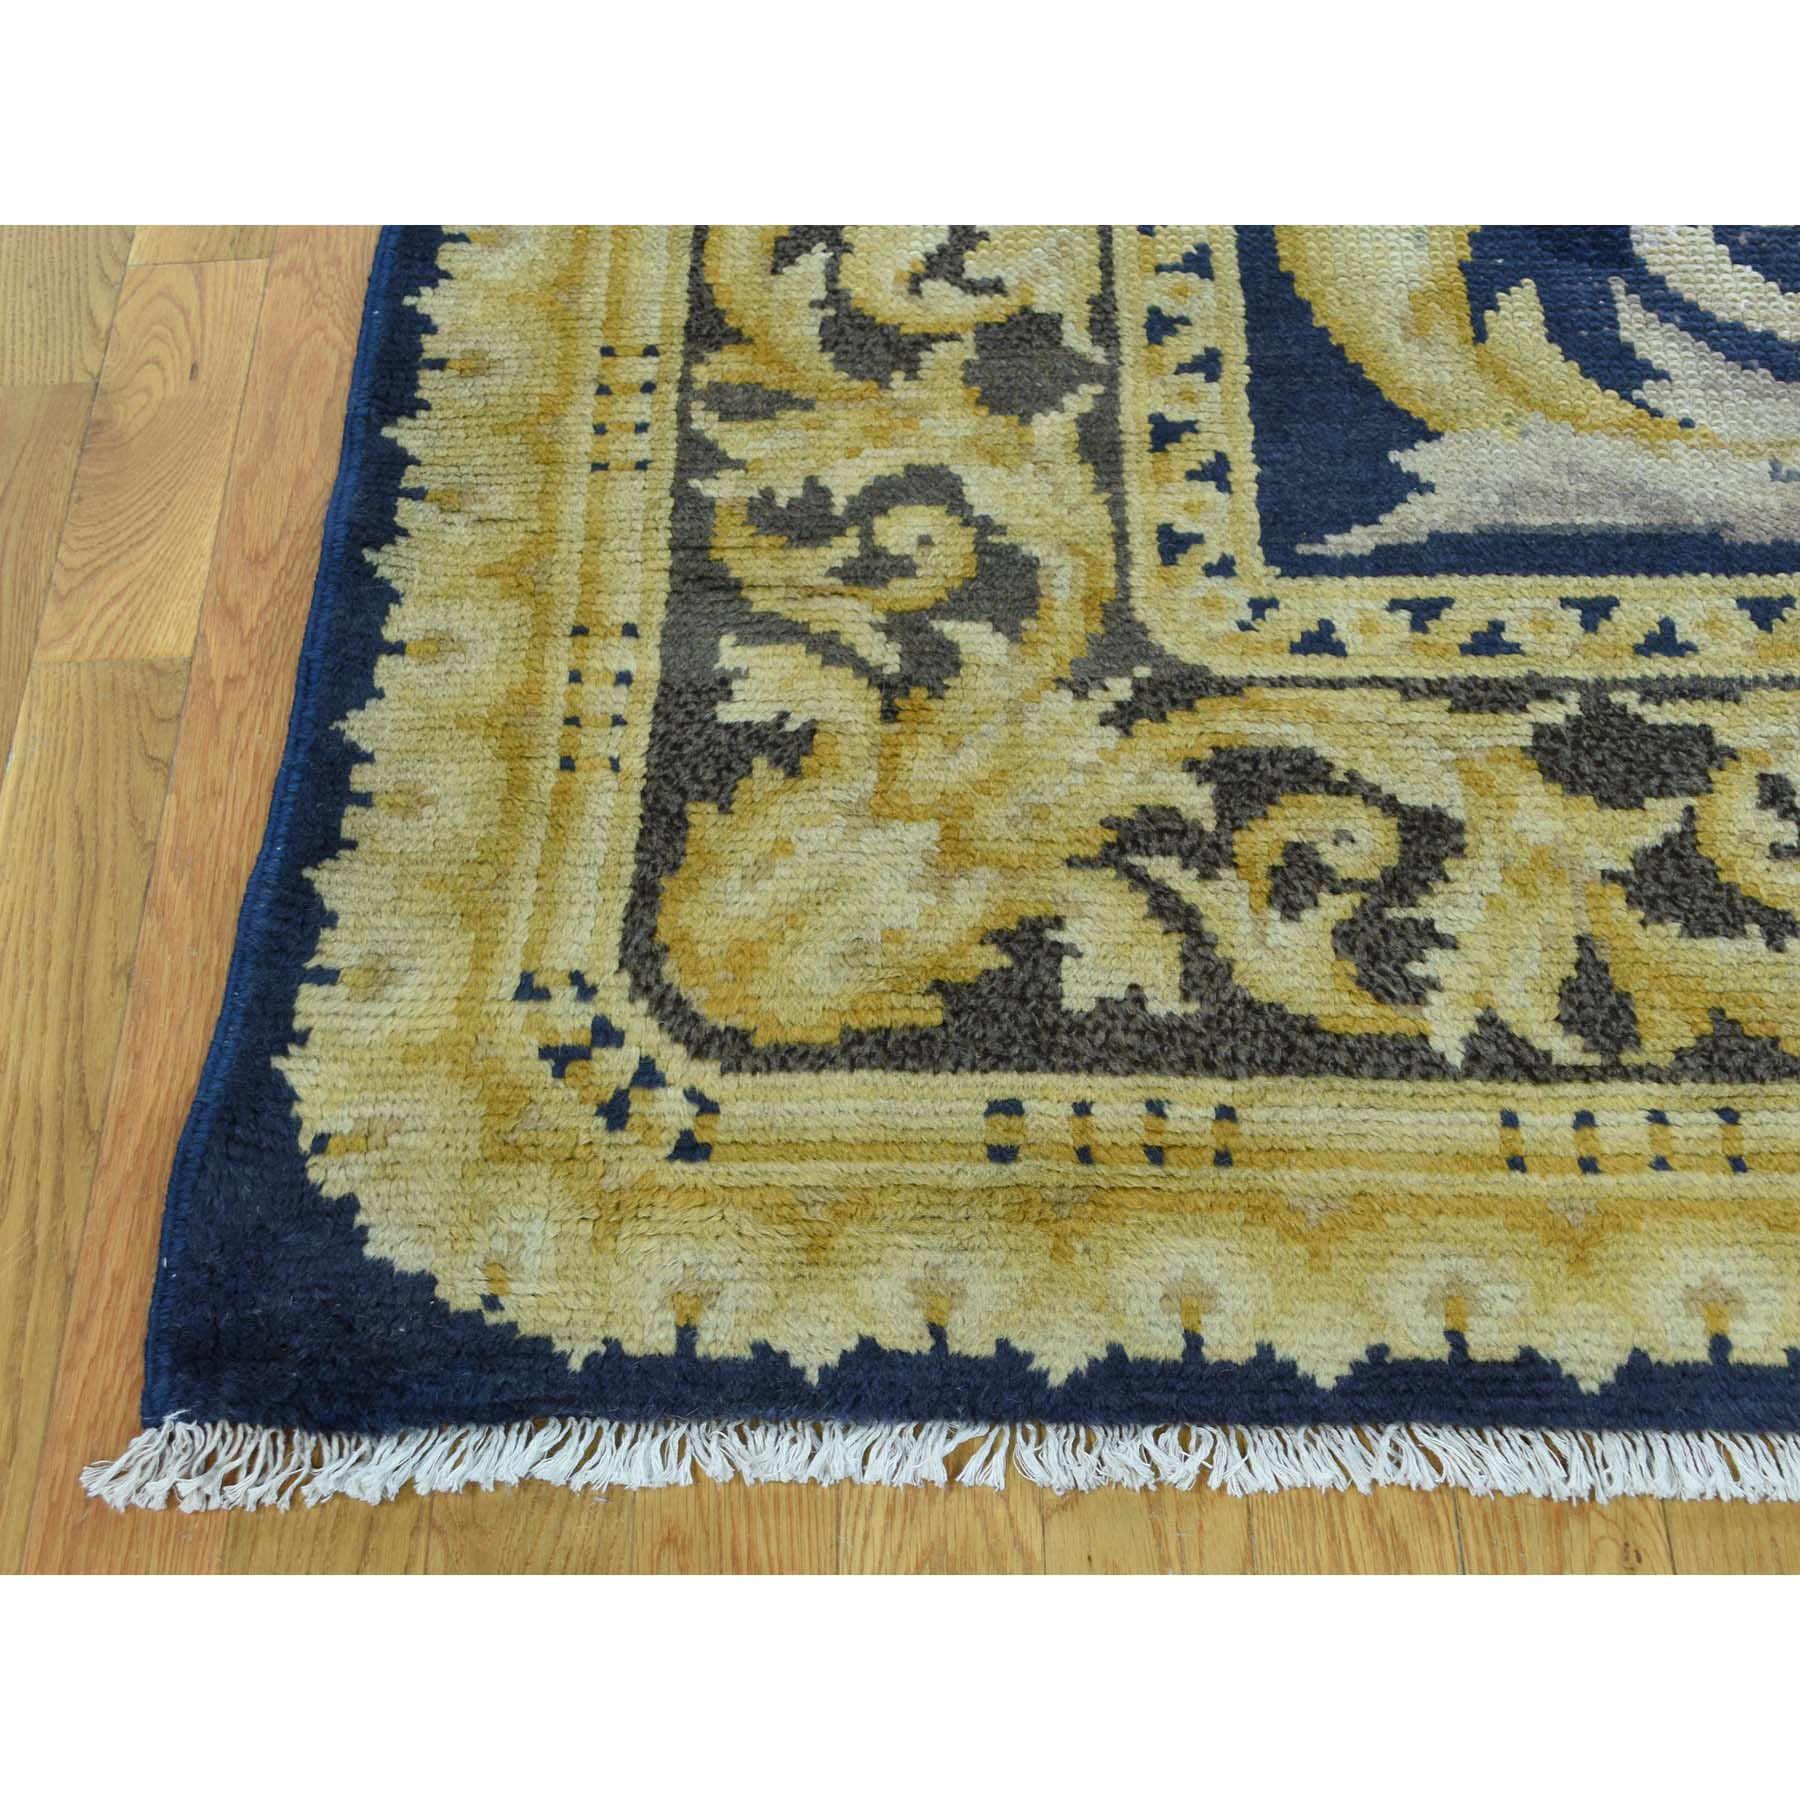 10-10 x13-8  Old Spanish Savonnerie Exc Cond Hand-Knotted Oversize Rug 